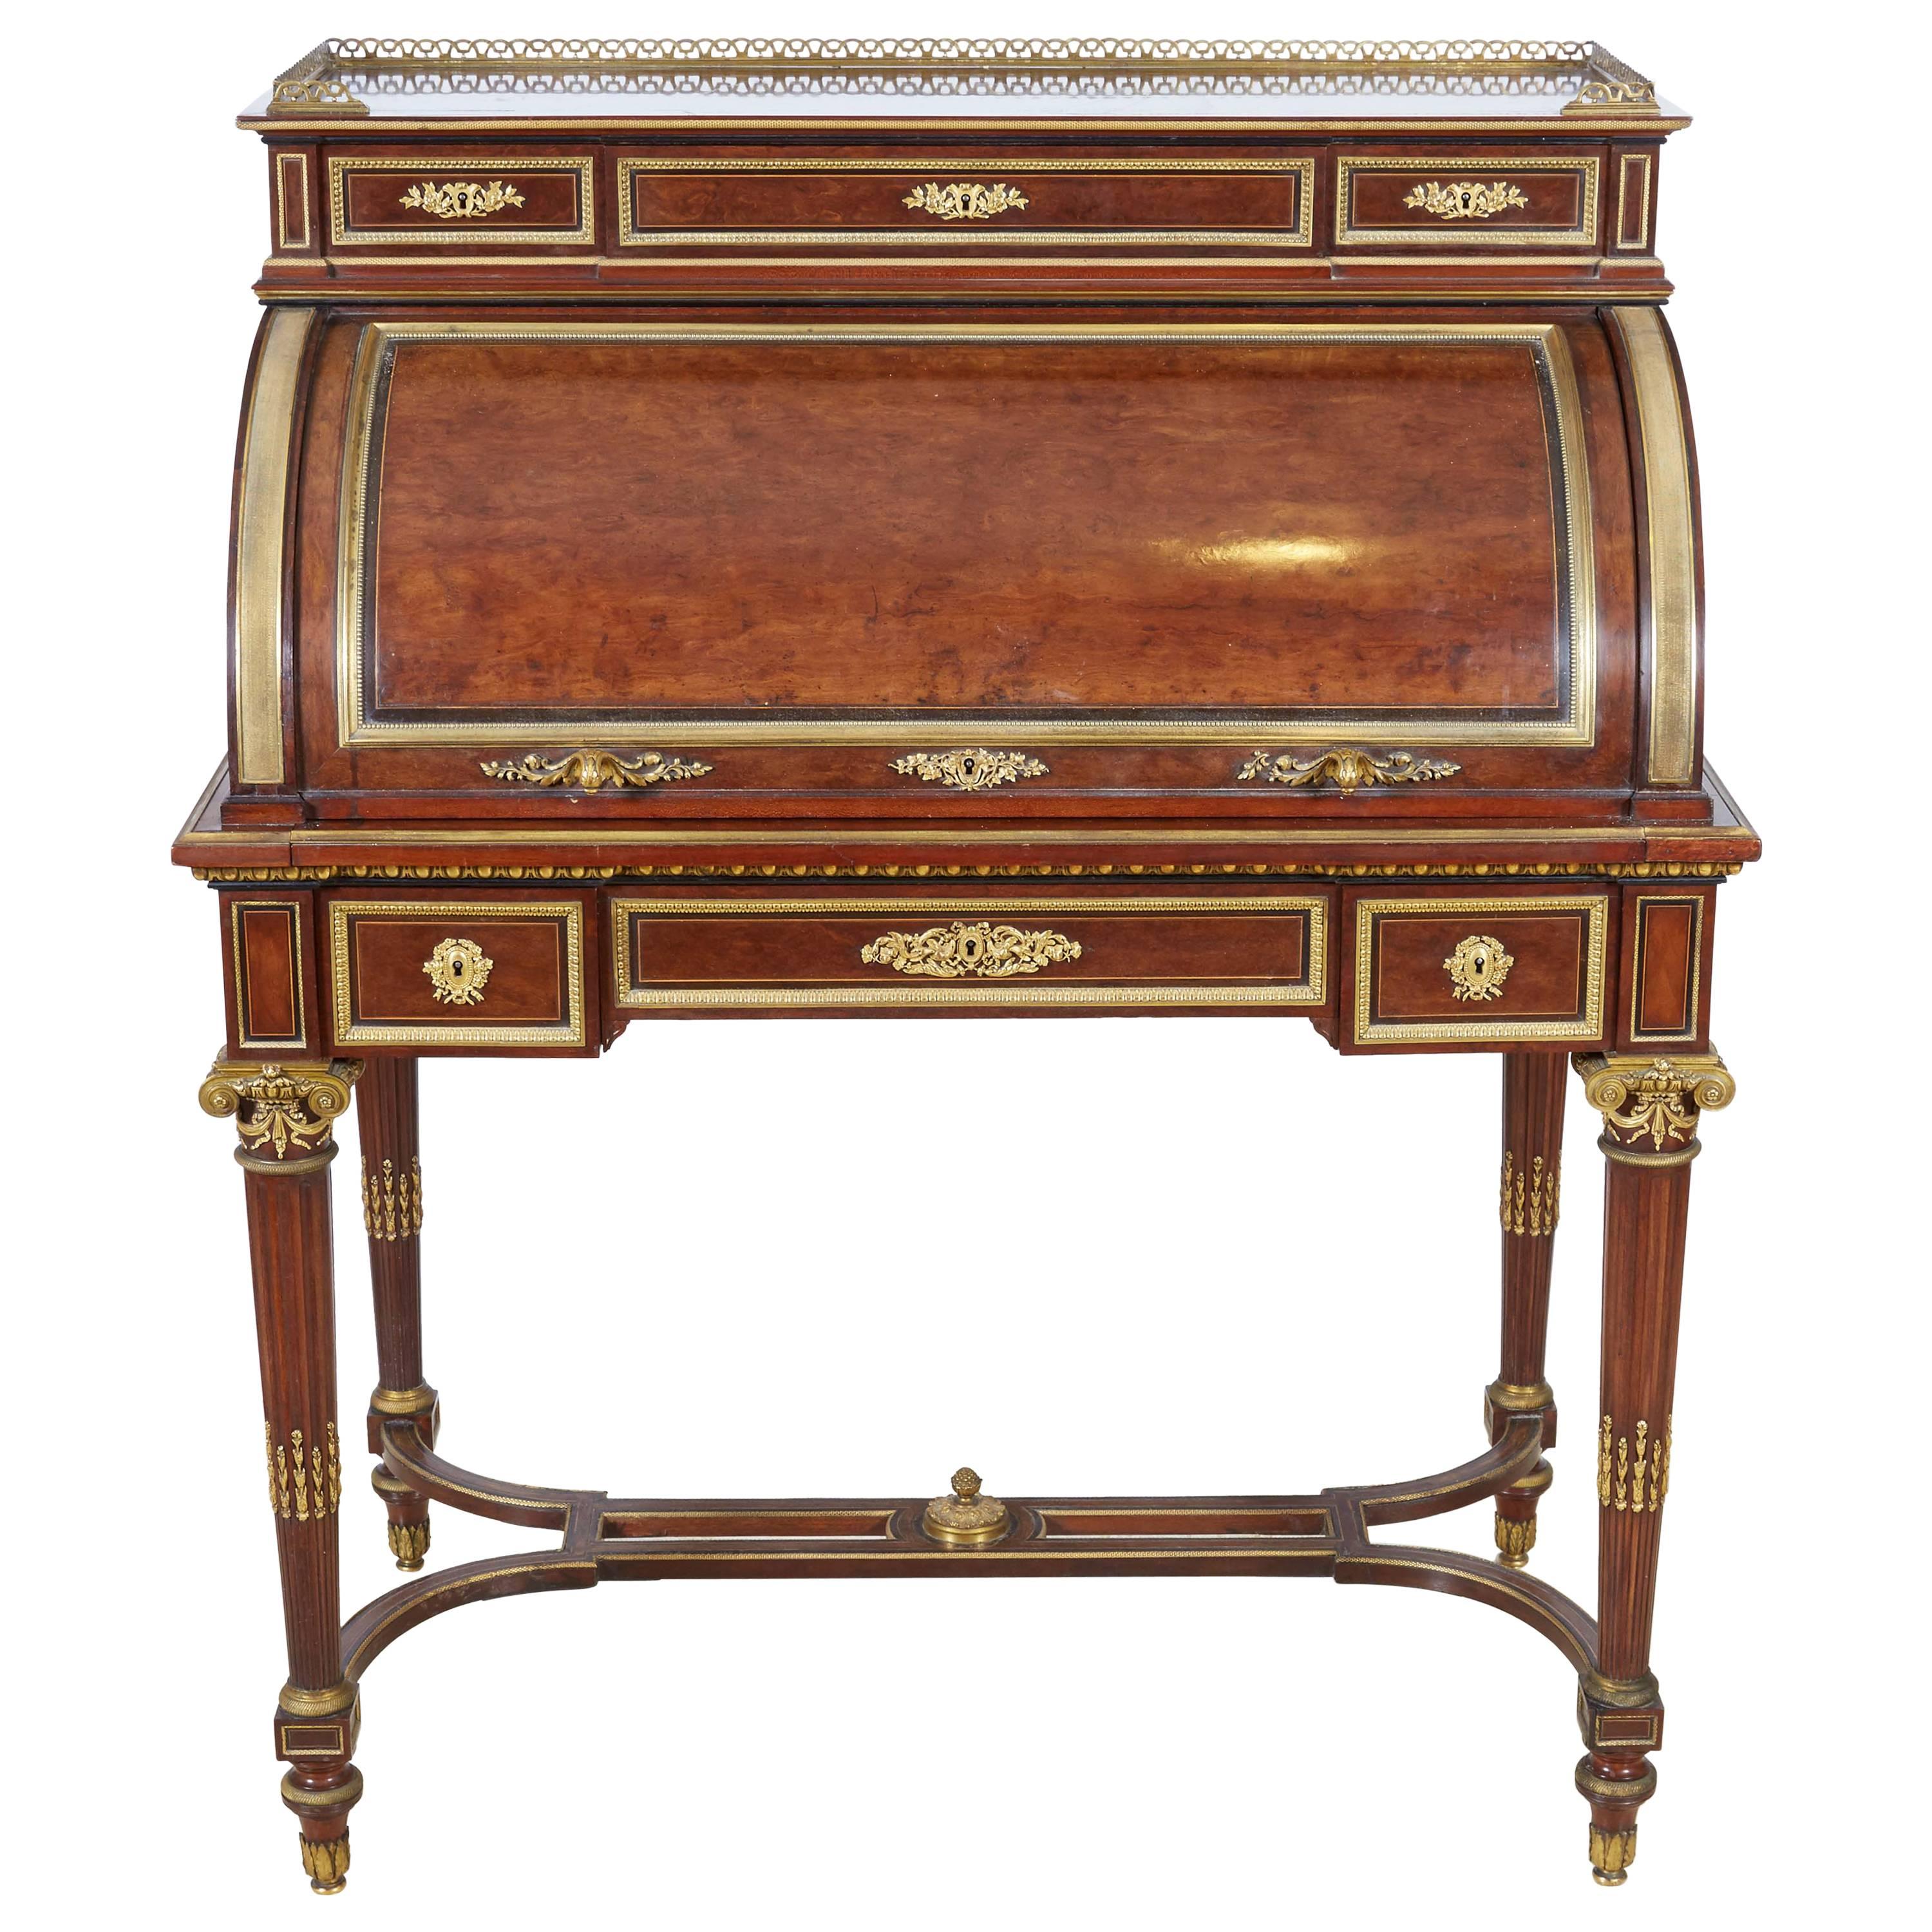 French Ormolu-Mounted Bureau a Cylindre Roll Top Desk Signed H. Fourdinois